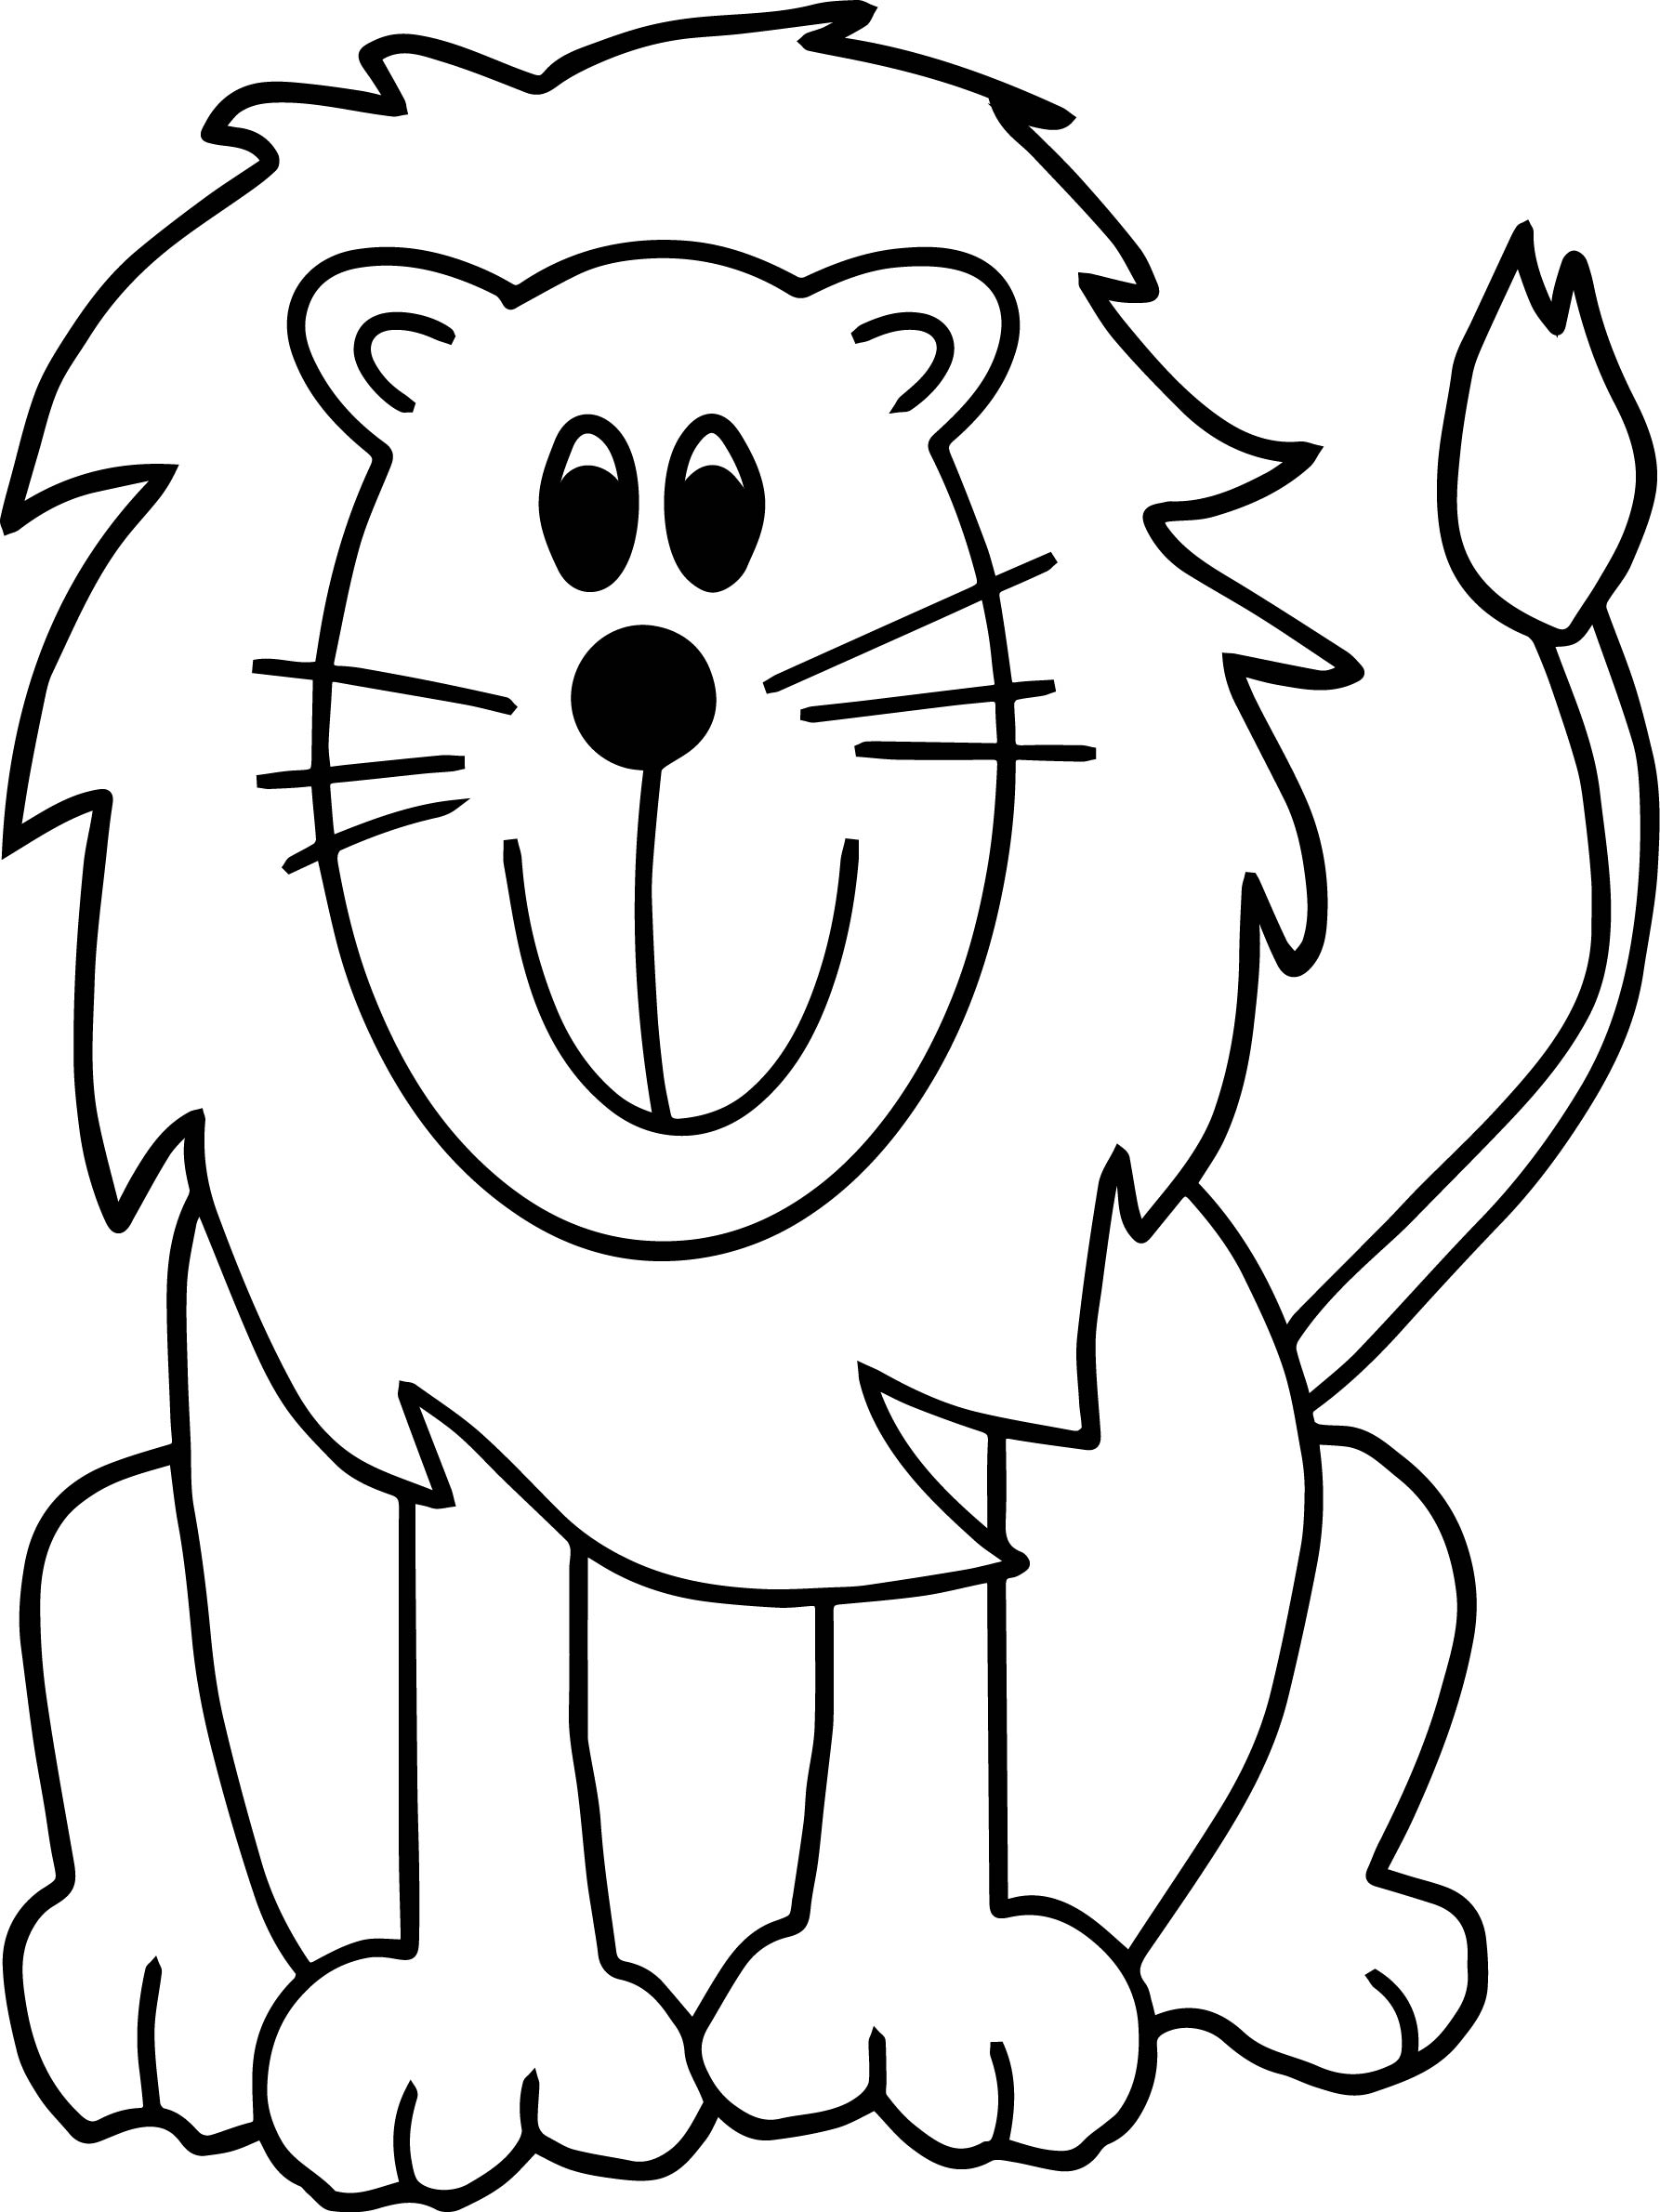 Coloring Pages Zootopia | Free download on ClipArtMag